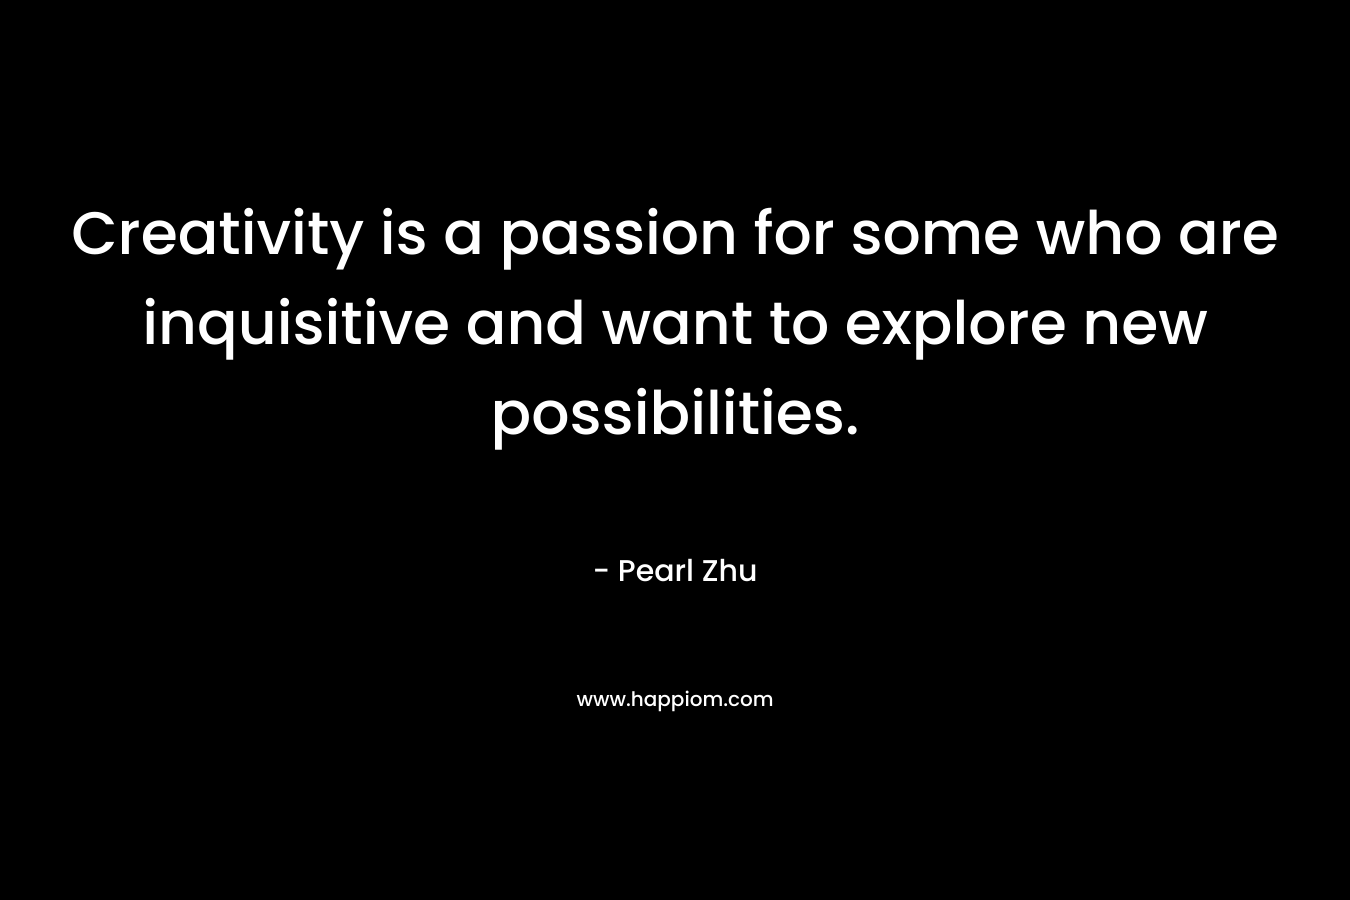 Creativity is a passion for some who are inquisitive and want to explore new possibilities.